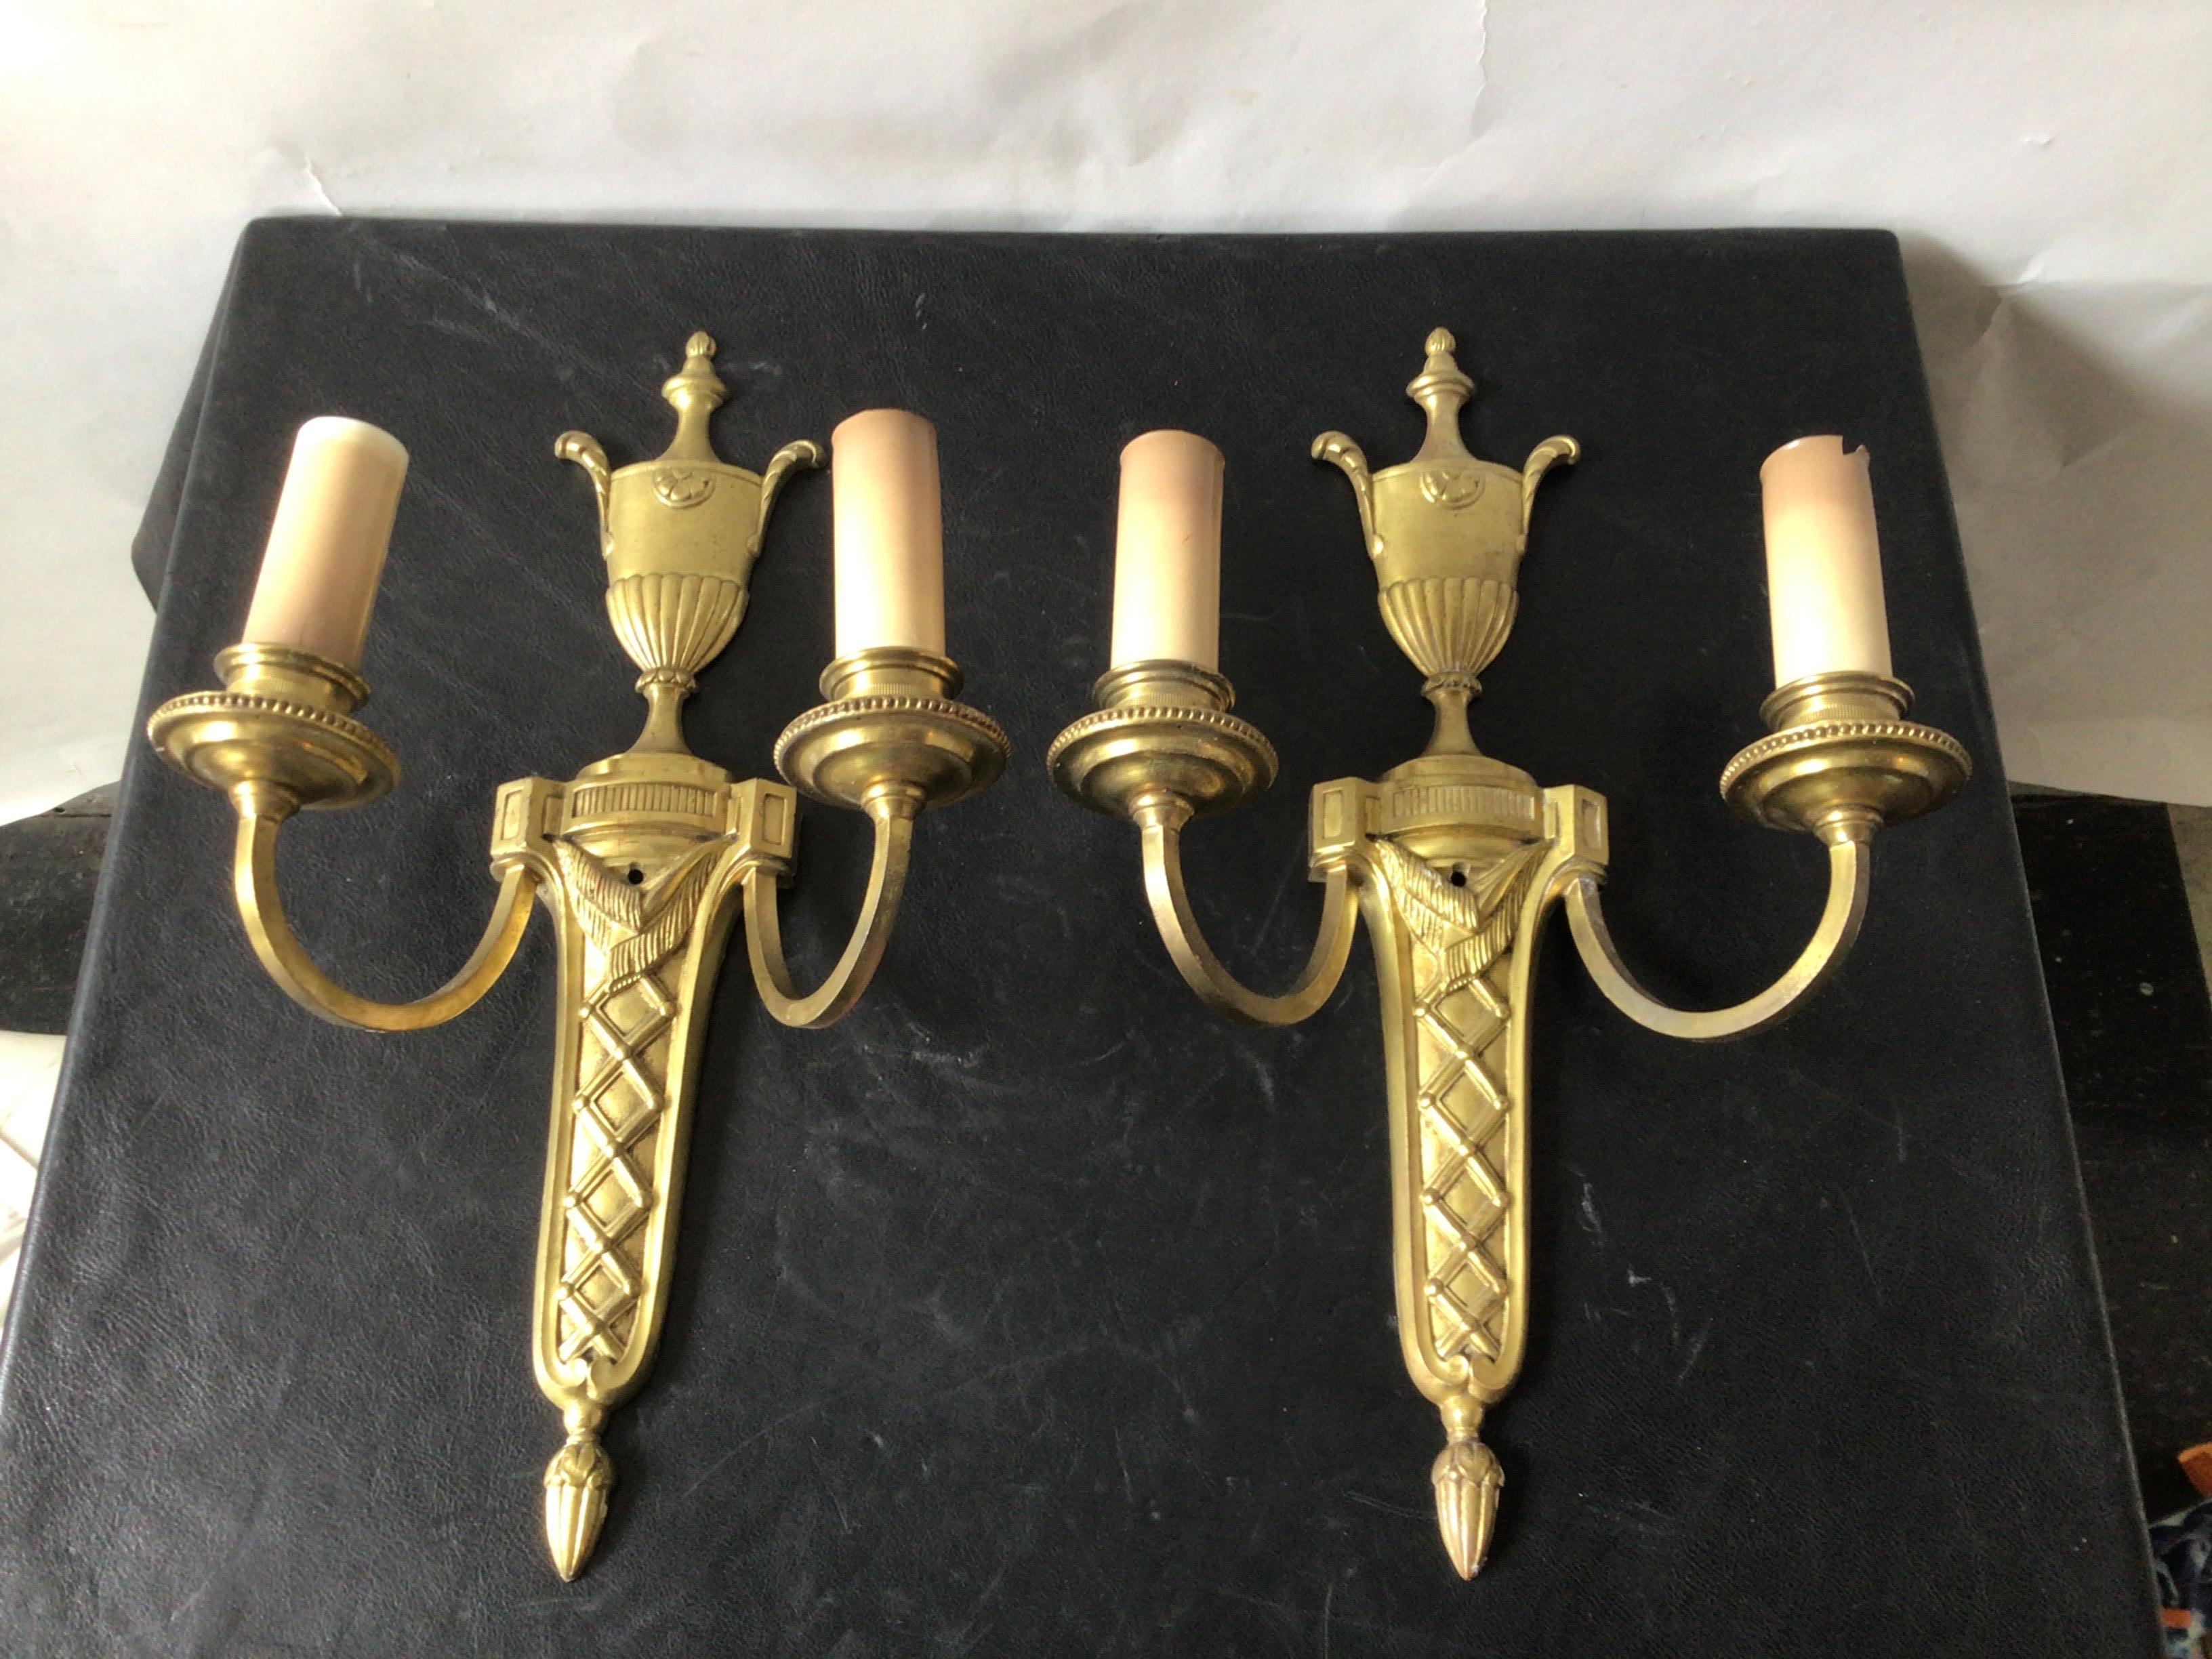 1950s Brass classical urn sconces. Reproduction of a Caldwell design.